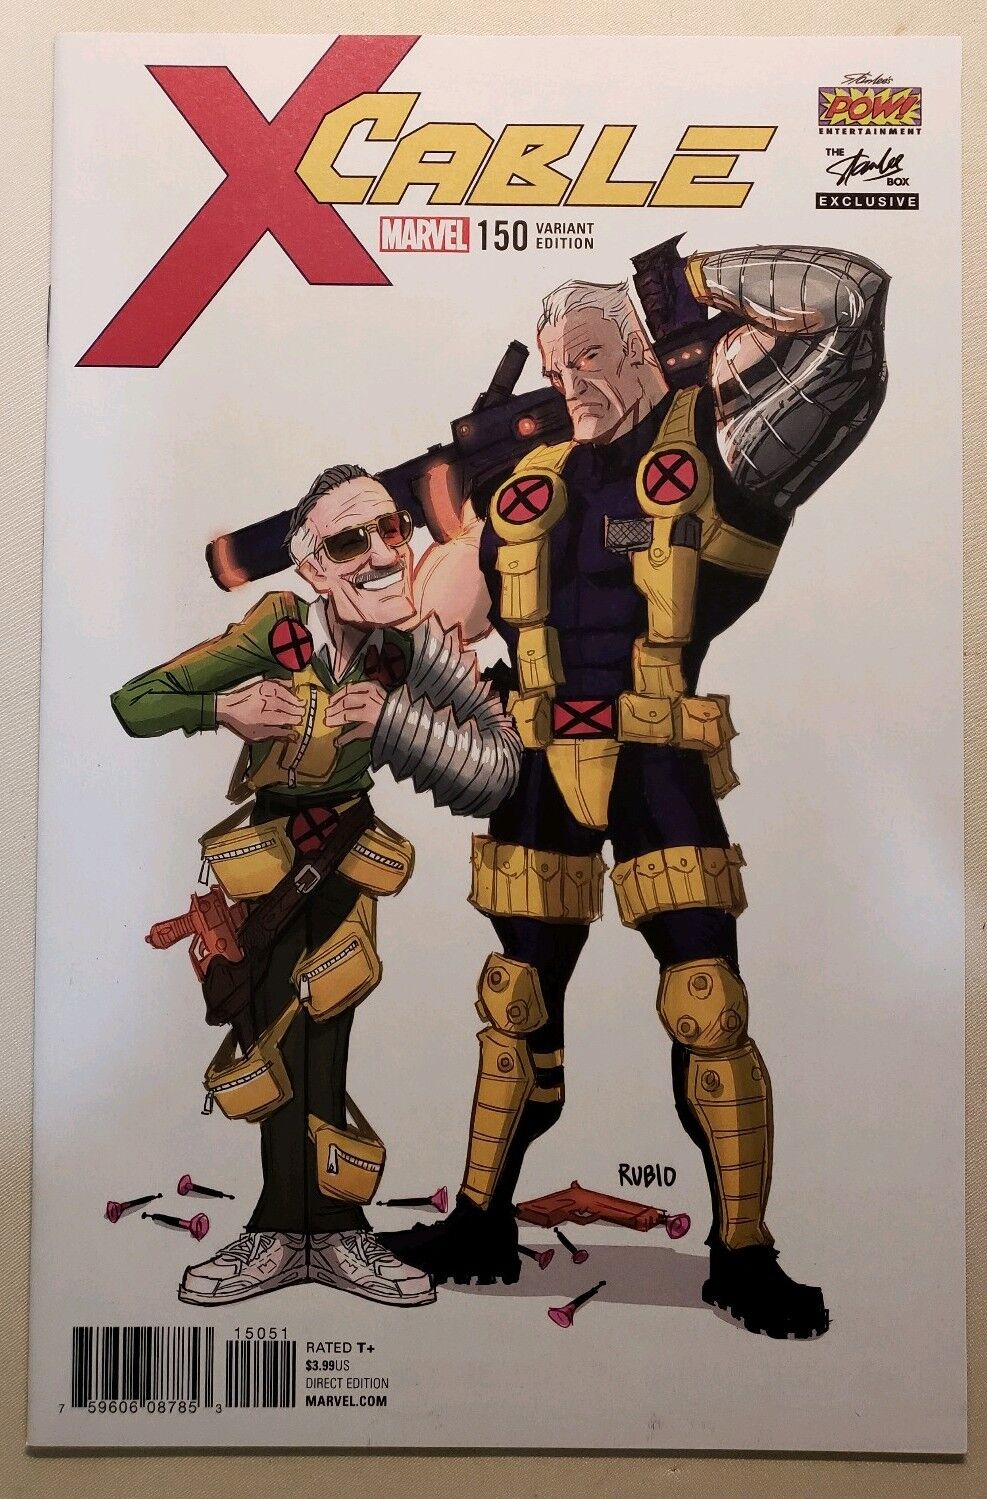 CABLE #150 STAN LEE BOX VARIANT Rare Hot Marvel Legacy X-Men Near Mint